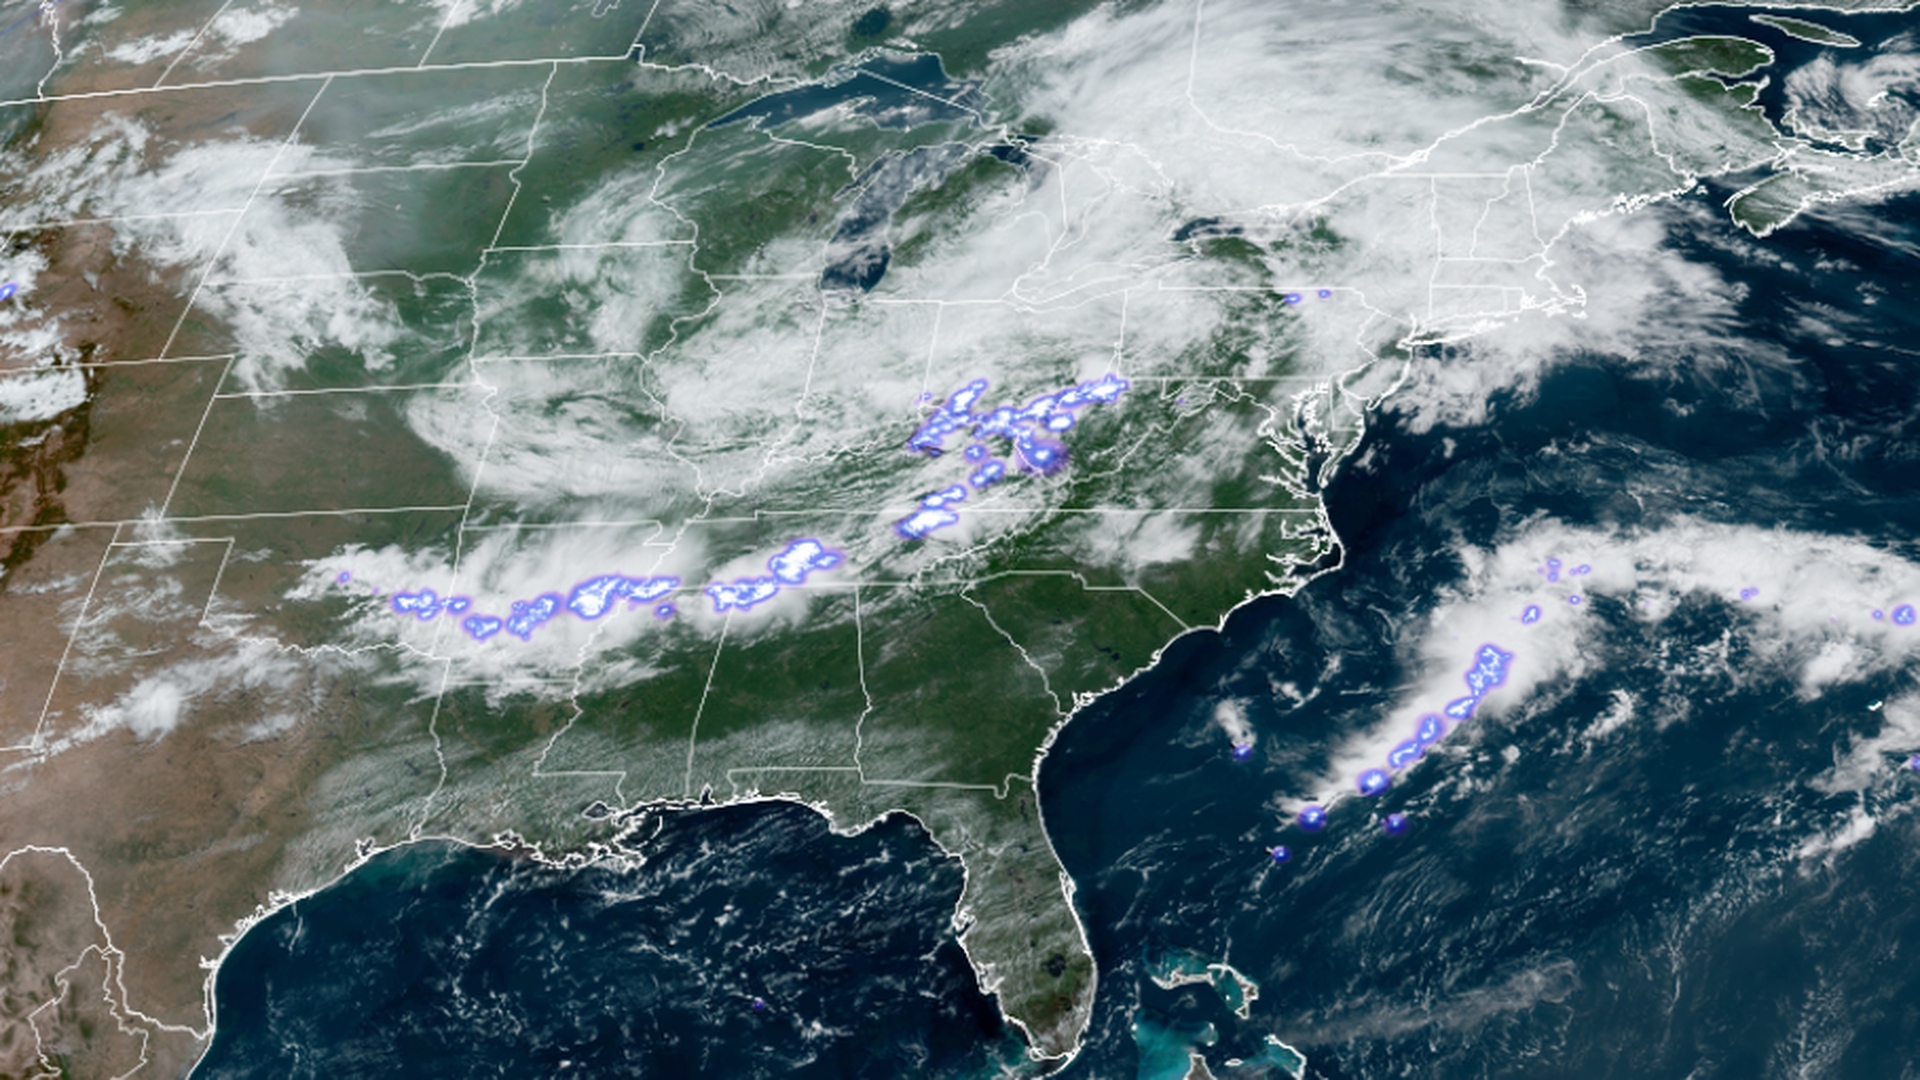 A satellite image showing thunderstorms with lightning flashes across the Eastern U.S. on Aug. 7.